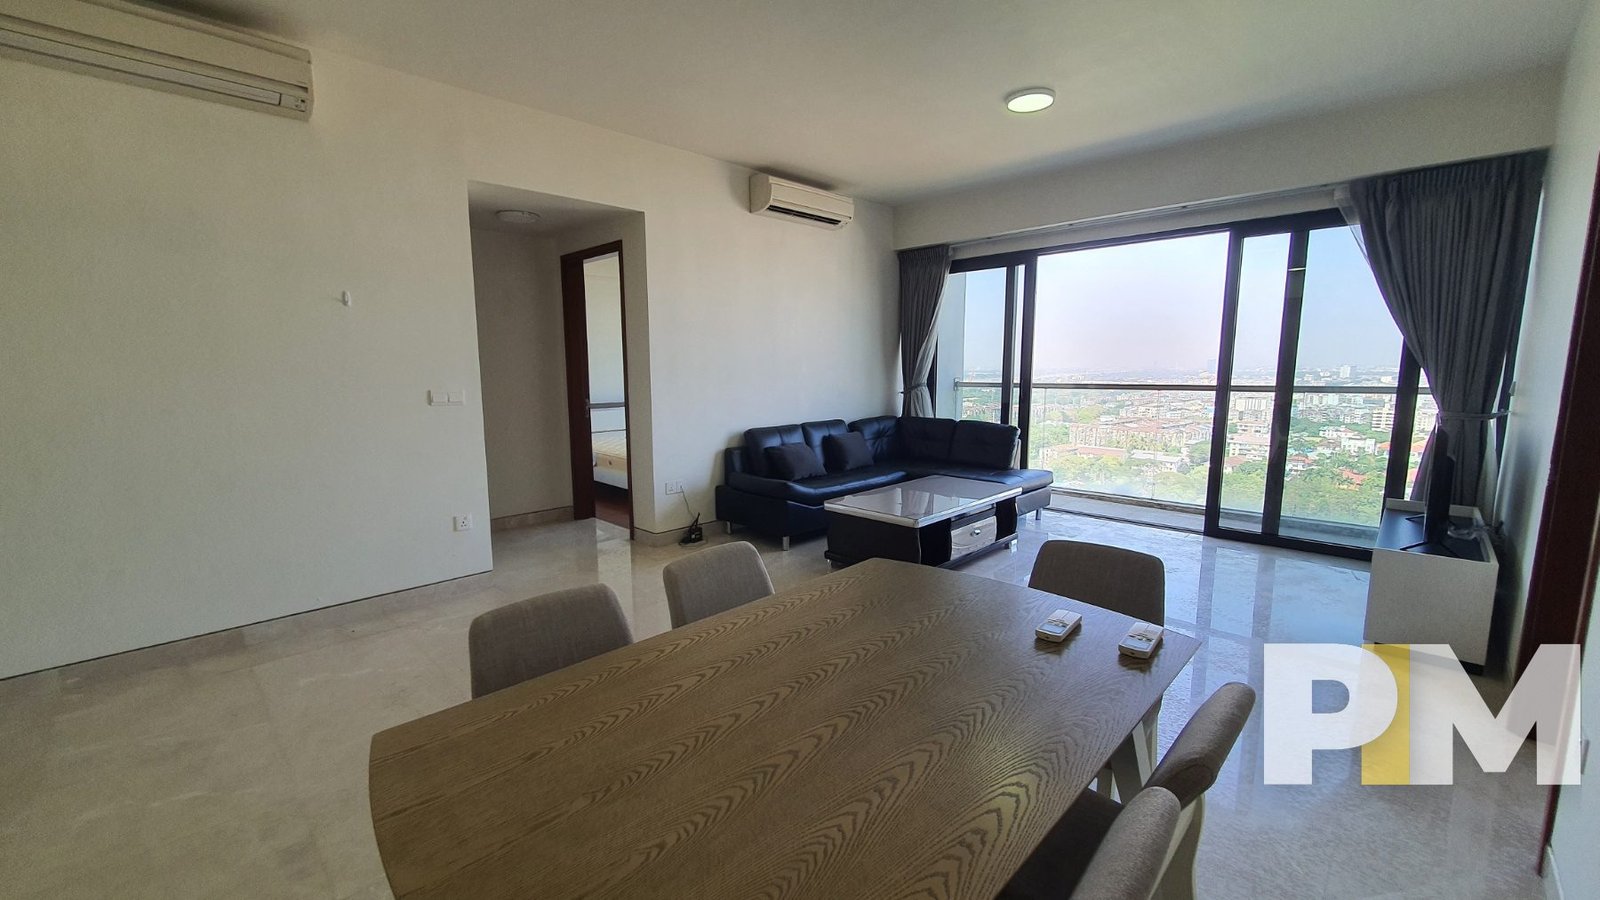 living room with dining room - Yangon Real Estate